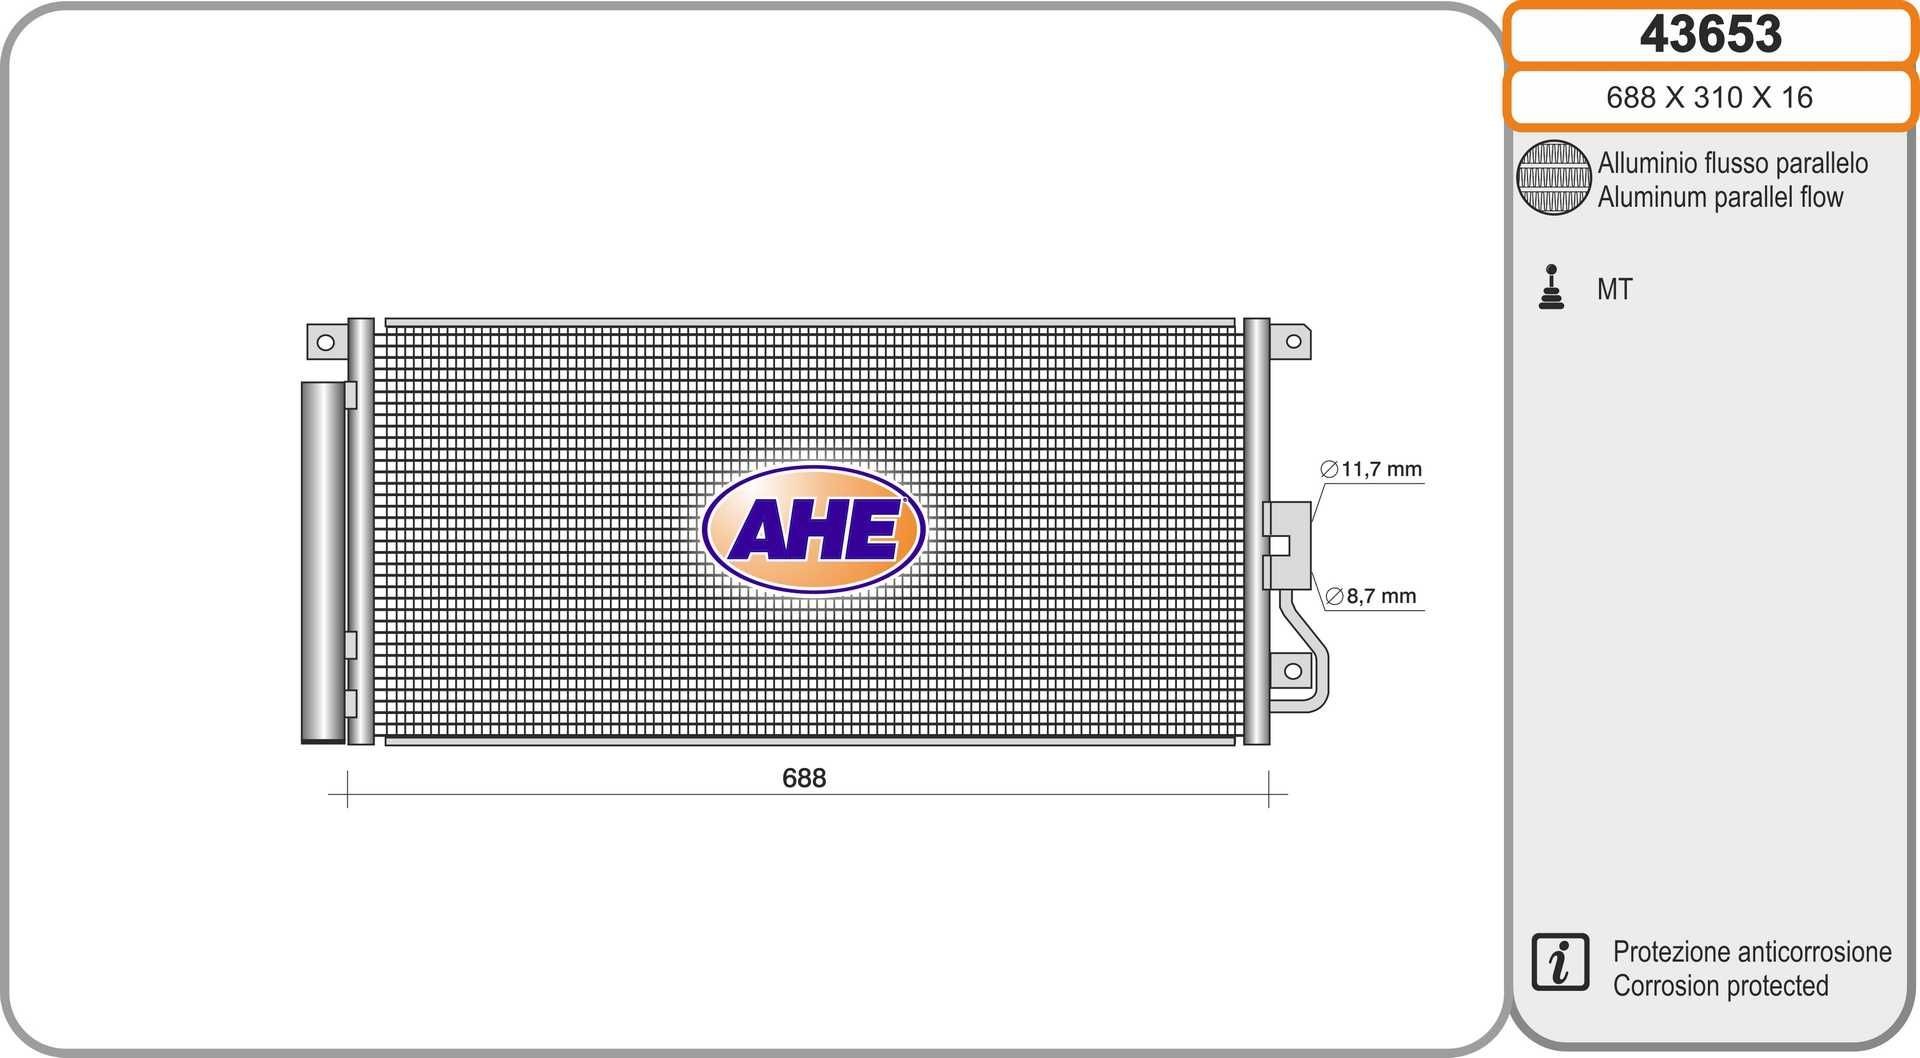 Condenser air conditioning AHE 688mm - 43653